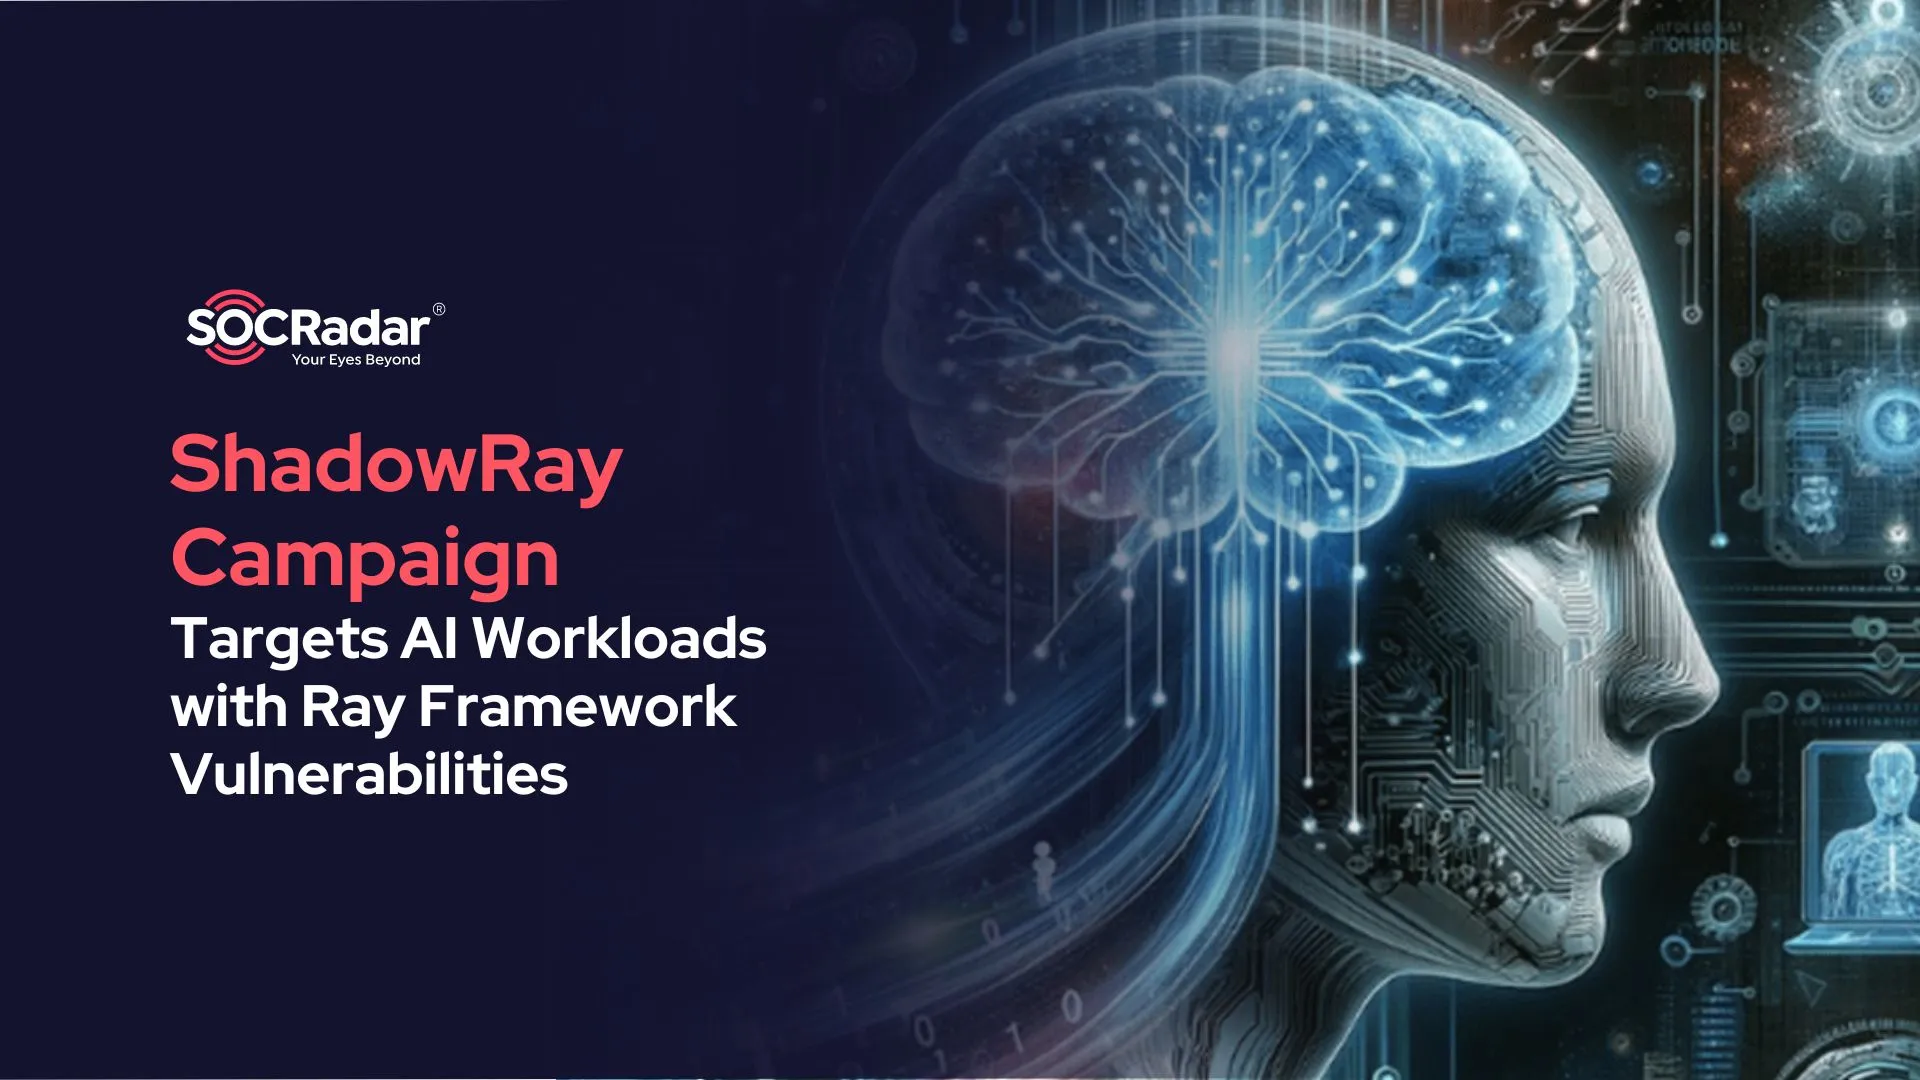 SOCRadar® Cyber Intelligence Inc. | ShadowRay Campaign Exploits Critical Ray Framework Vulnerabilities to Compromise AI Workloads Globally